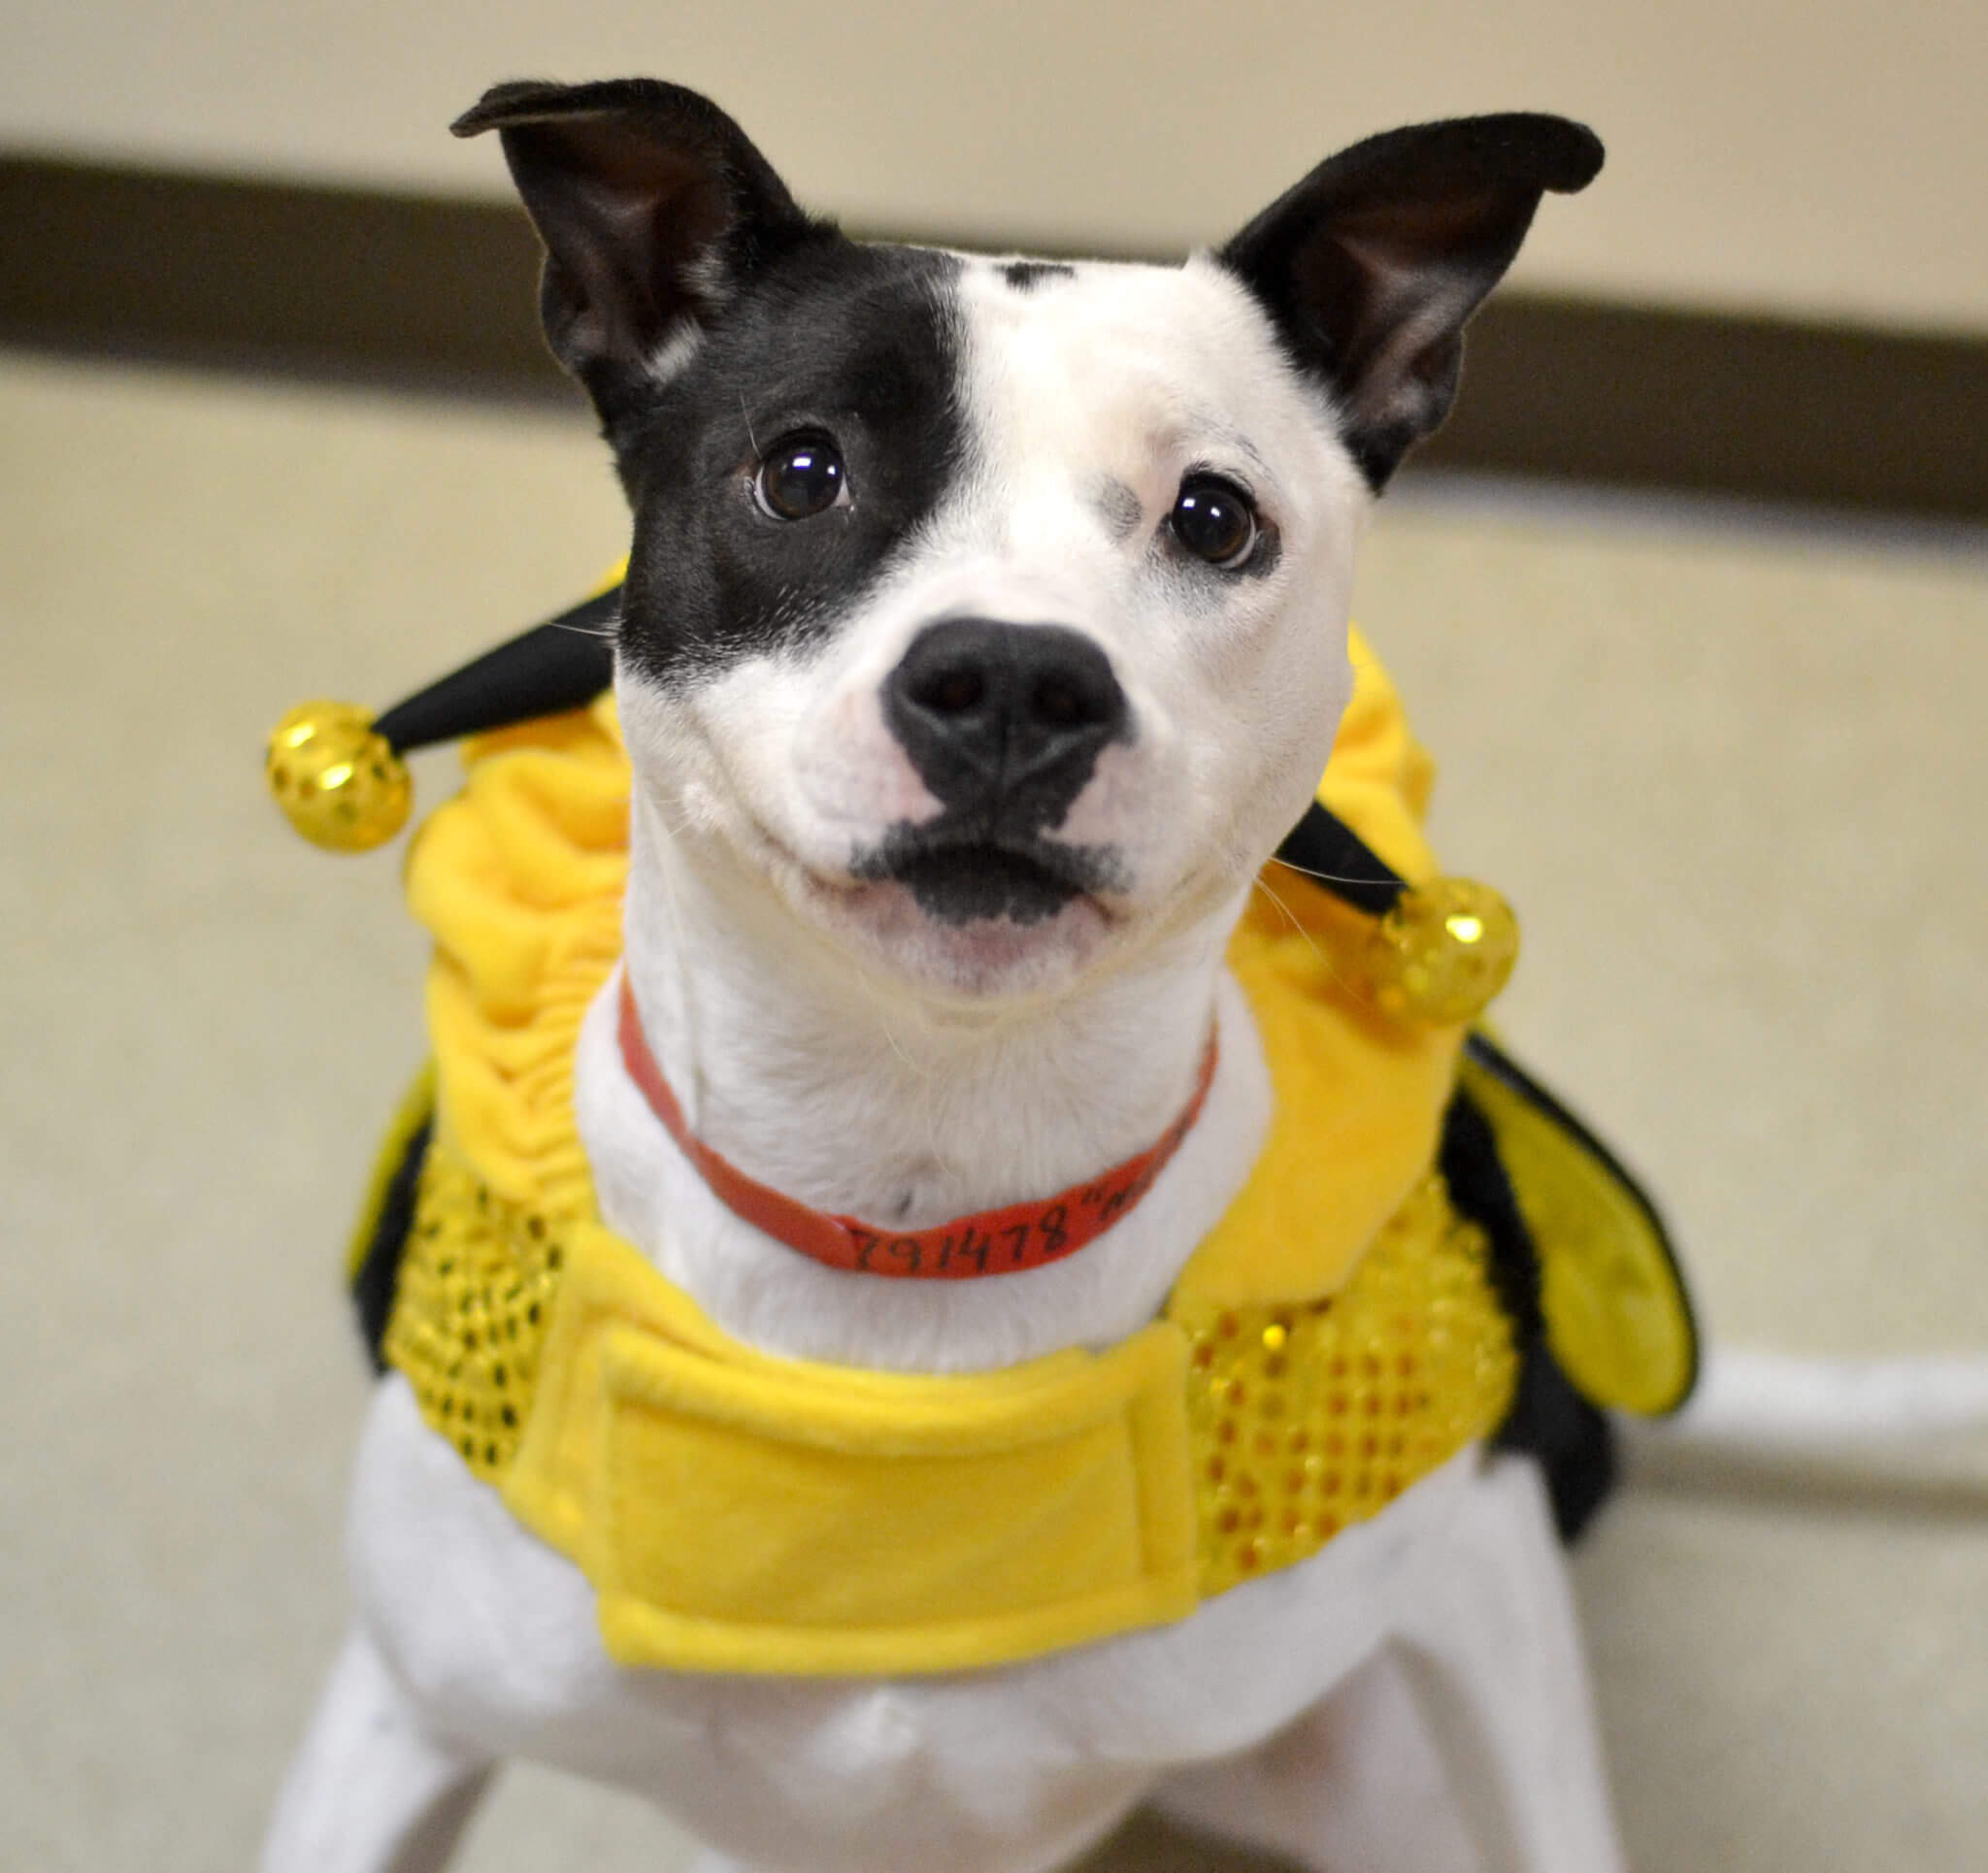 Molly is a happy and active young pit bull mix who was very excited about dressing up as a bee!